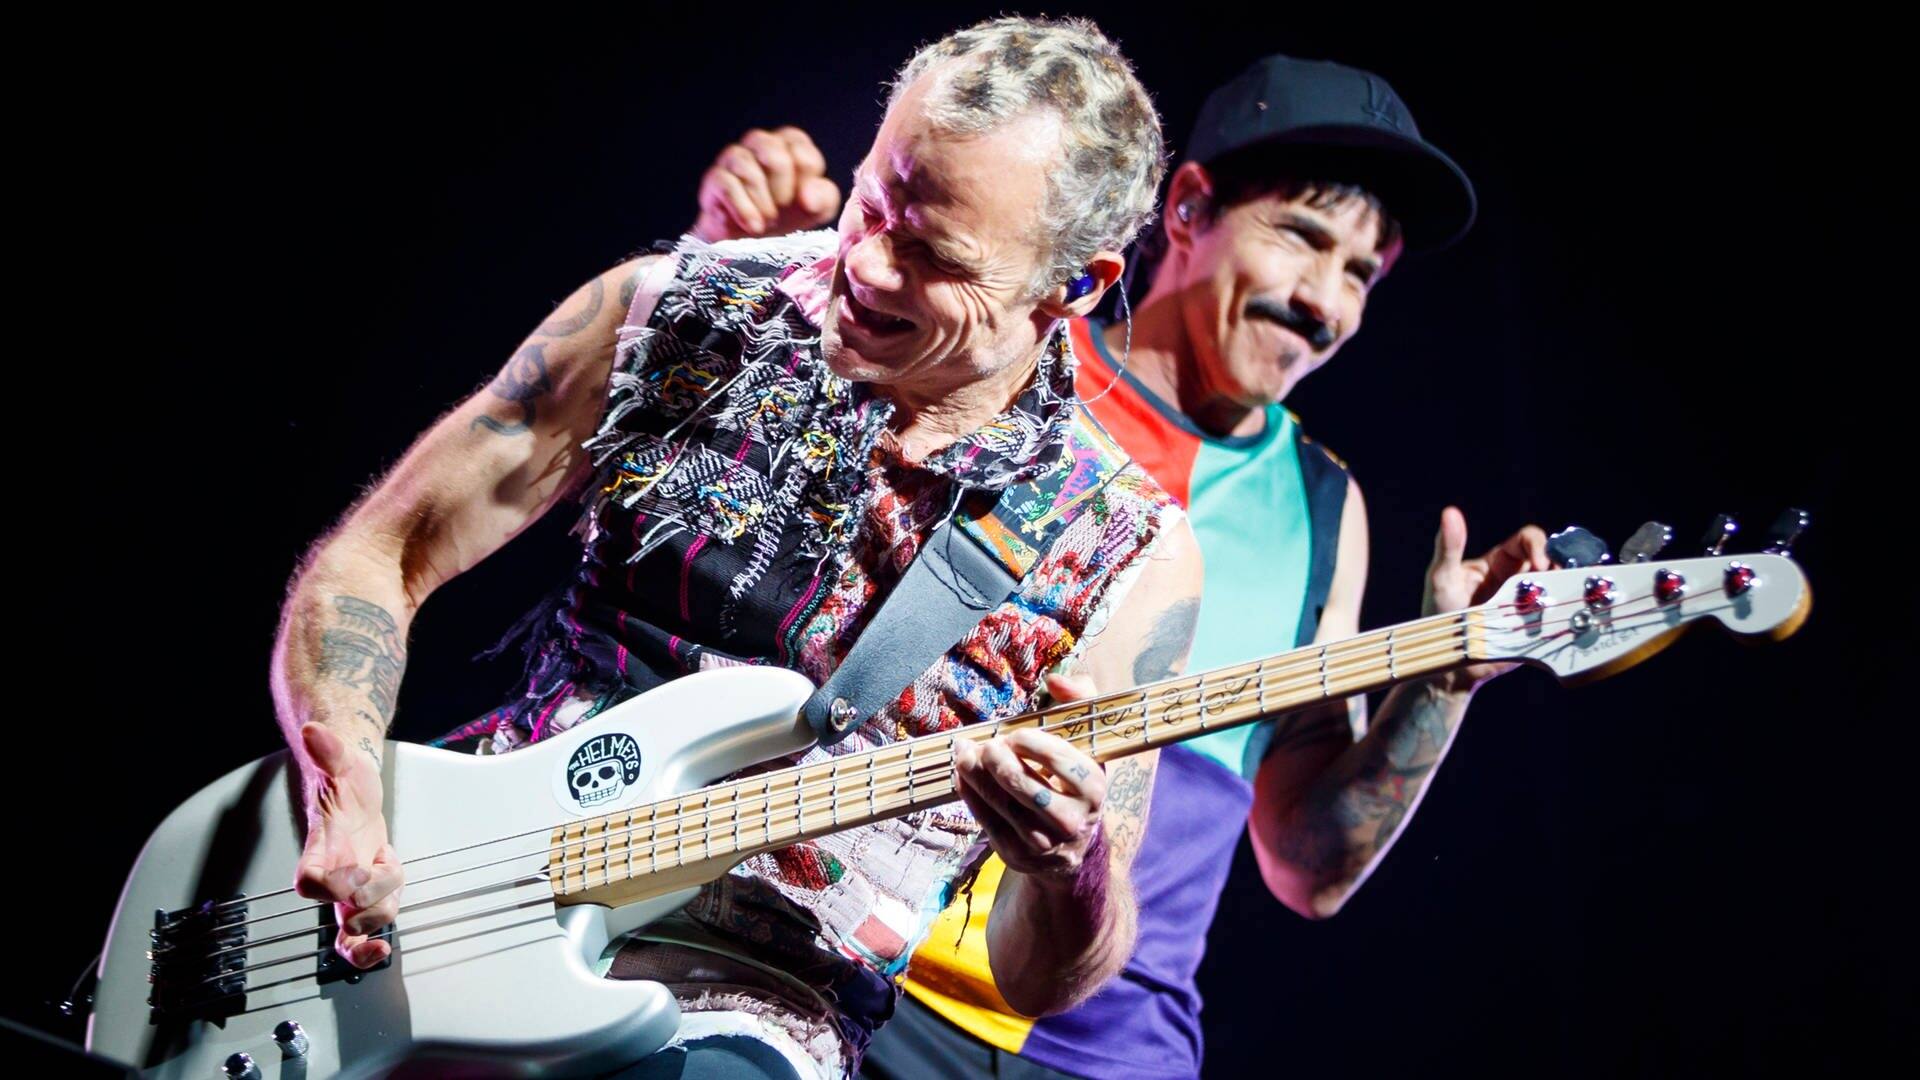 Flea und Anthony Kidies Red Hot Chili Peppers live 2019 Pyramiden Gizeh Ägypten (Foto: picture-alliance / Reportdienste, Picture Alliance)